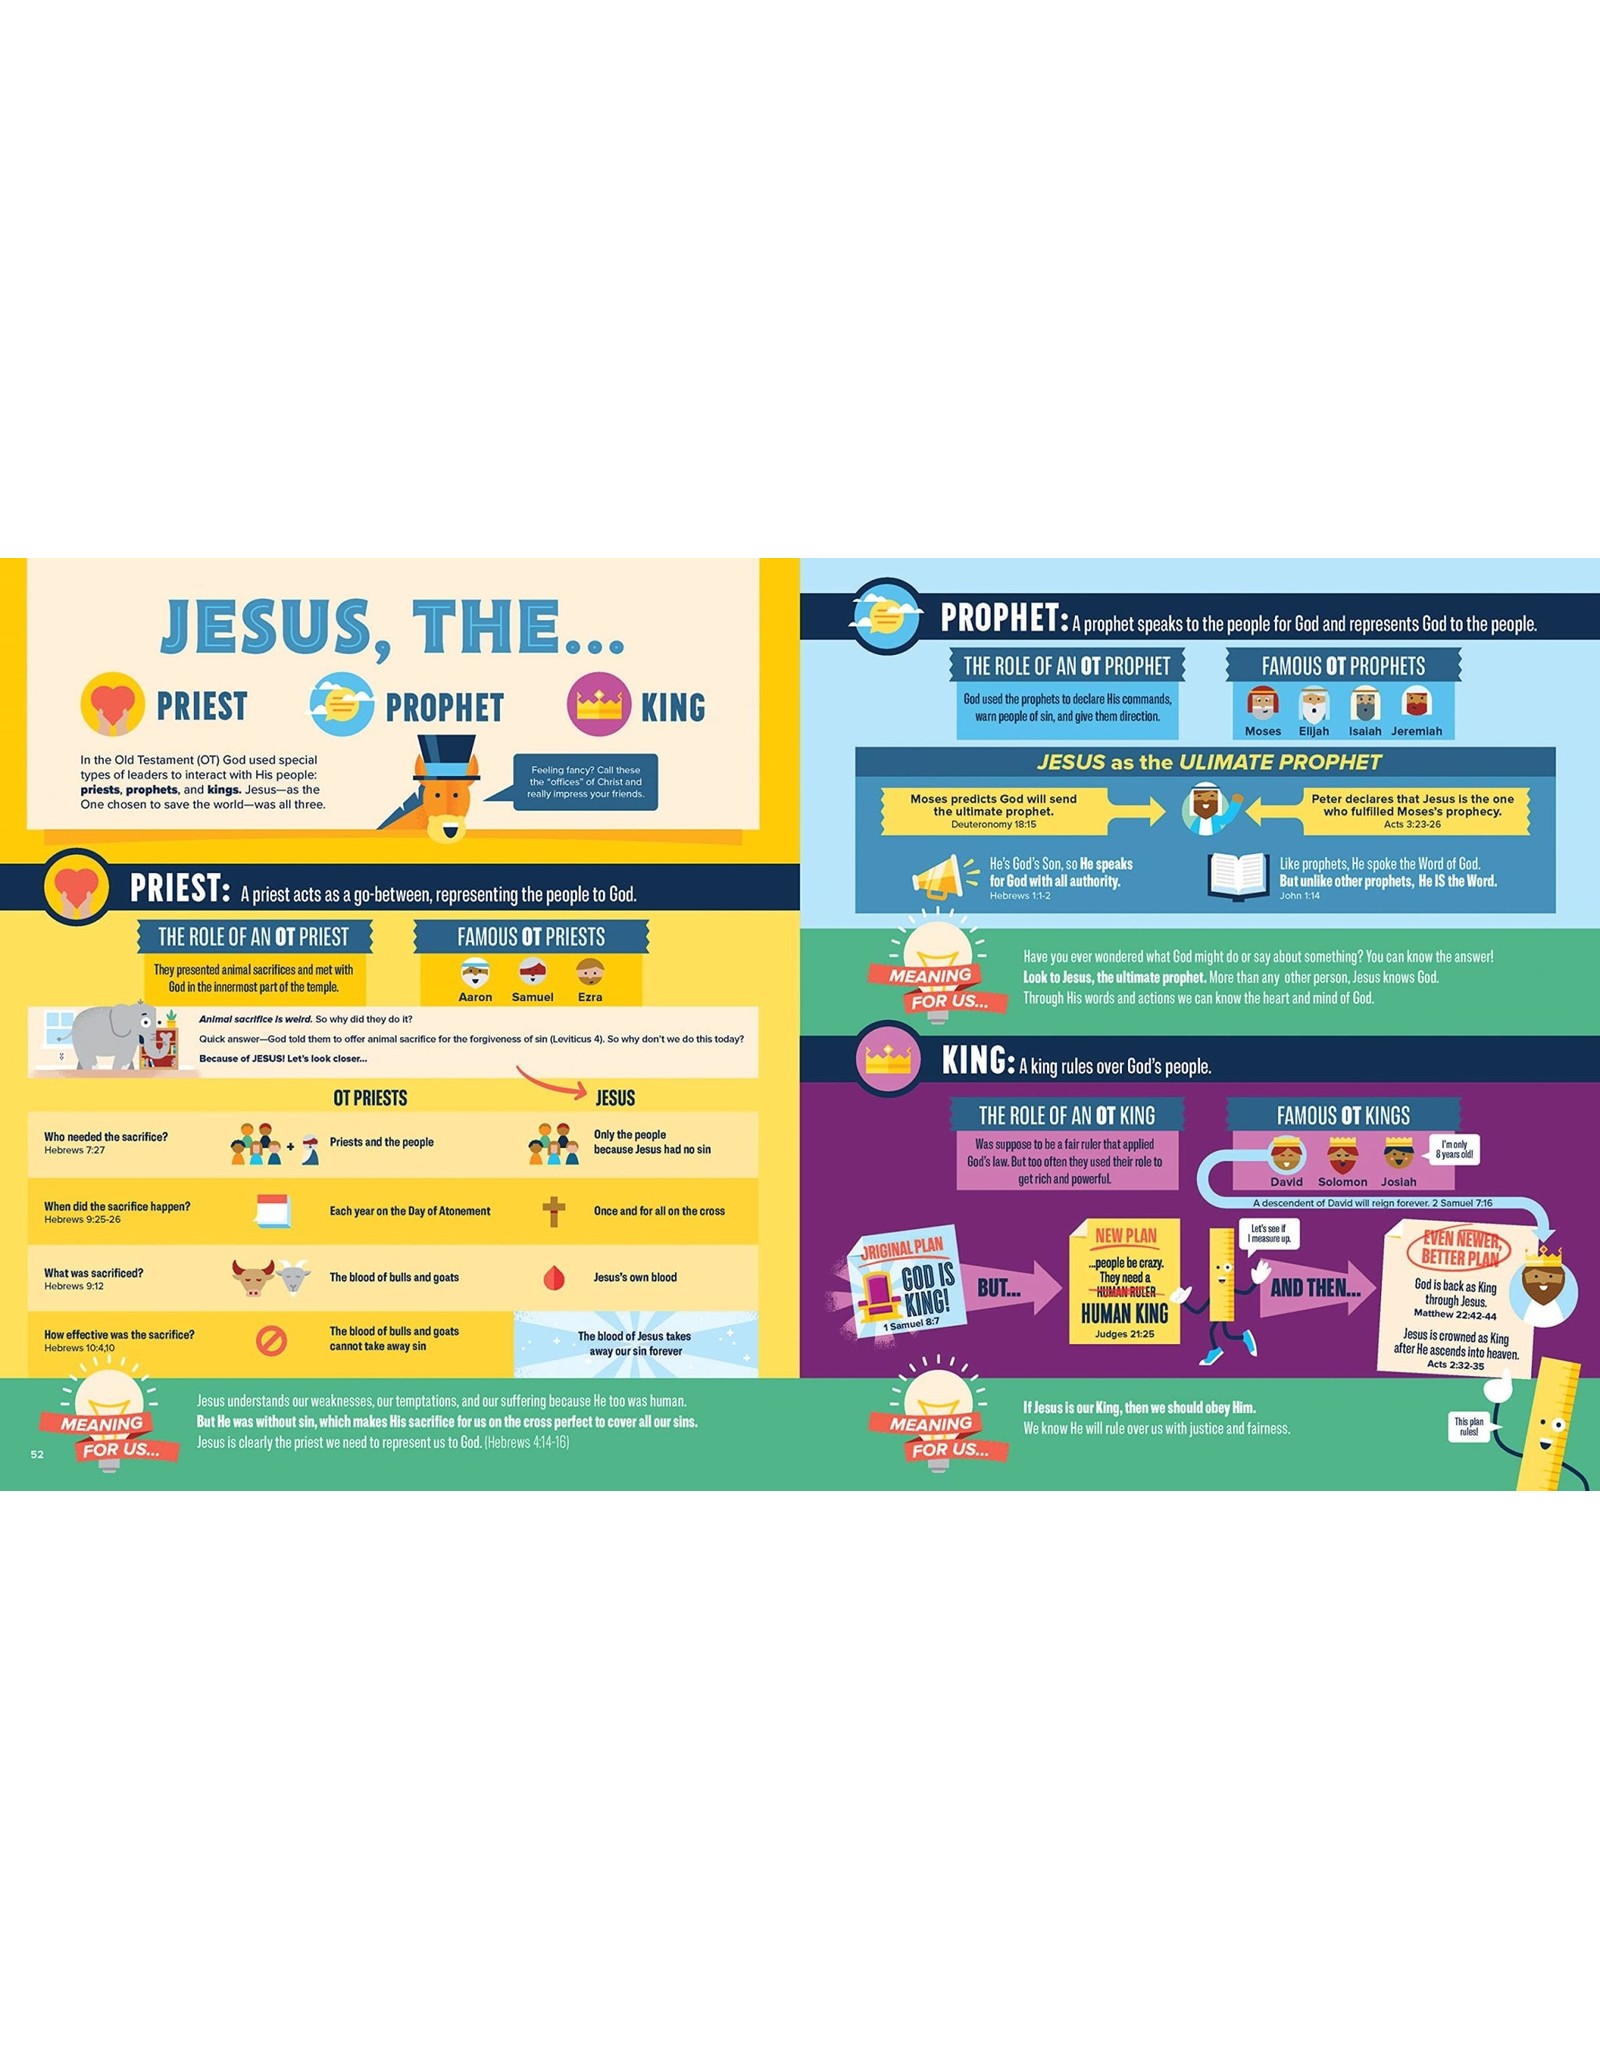 Harvest Kids Bible Infographics for Kids: Epic Guide to Jesus